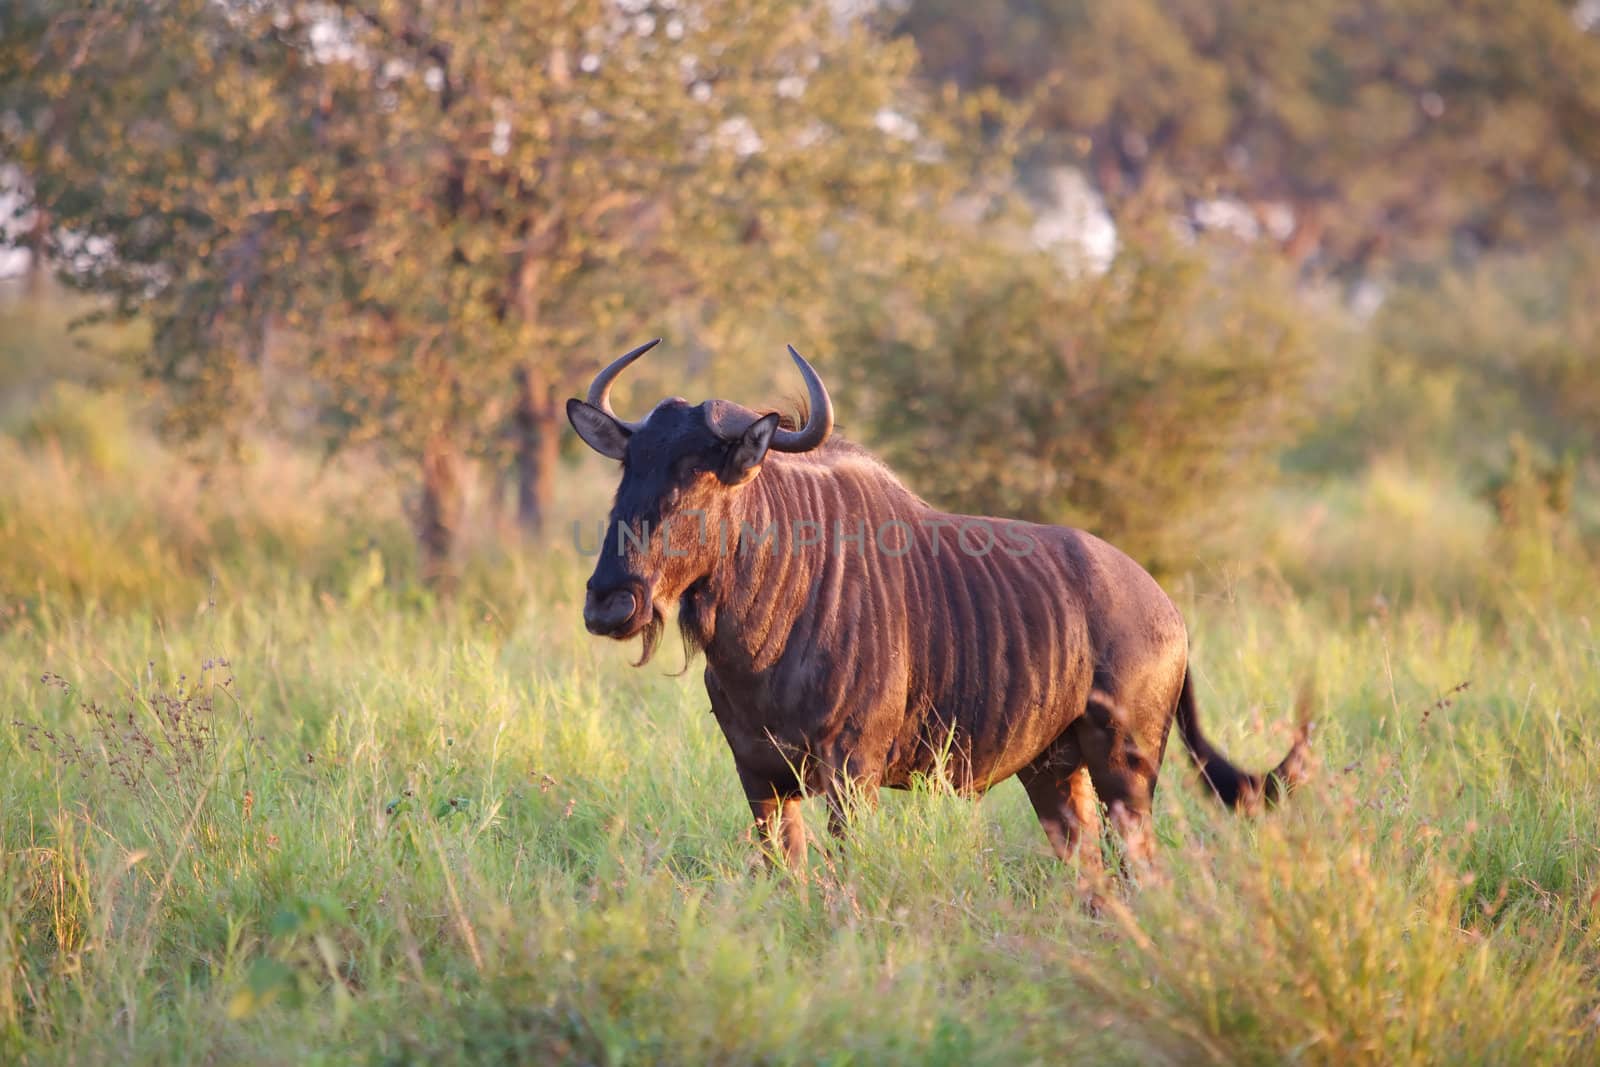 A blue wildebeest (Connochaetes taurinus) in the Kruger National Park, South Africa.